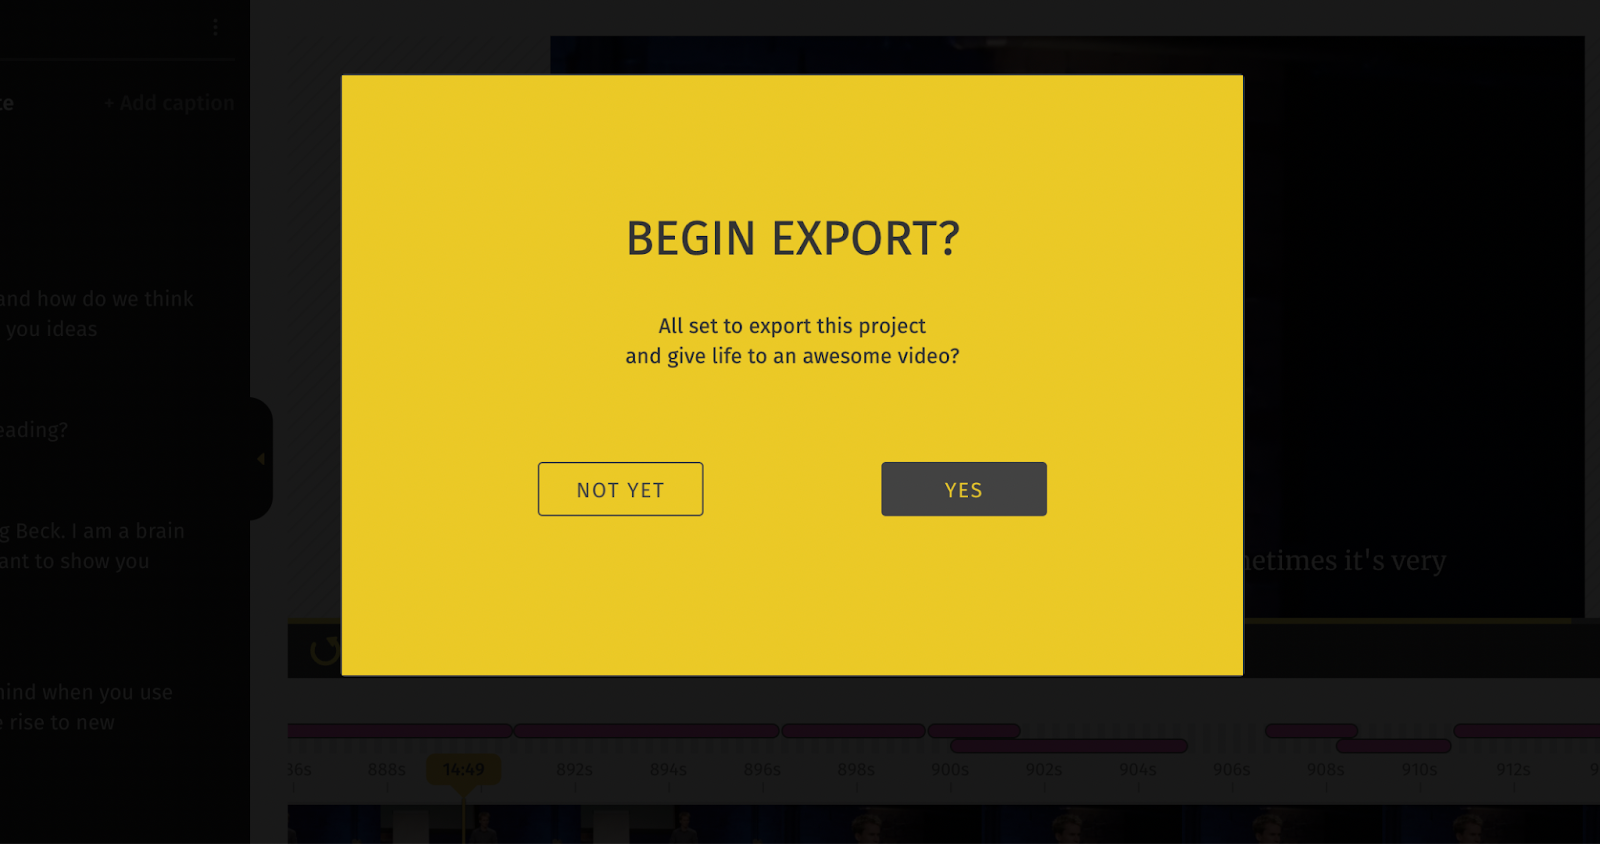 Click Yes to begin your export process.